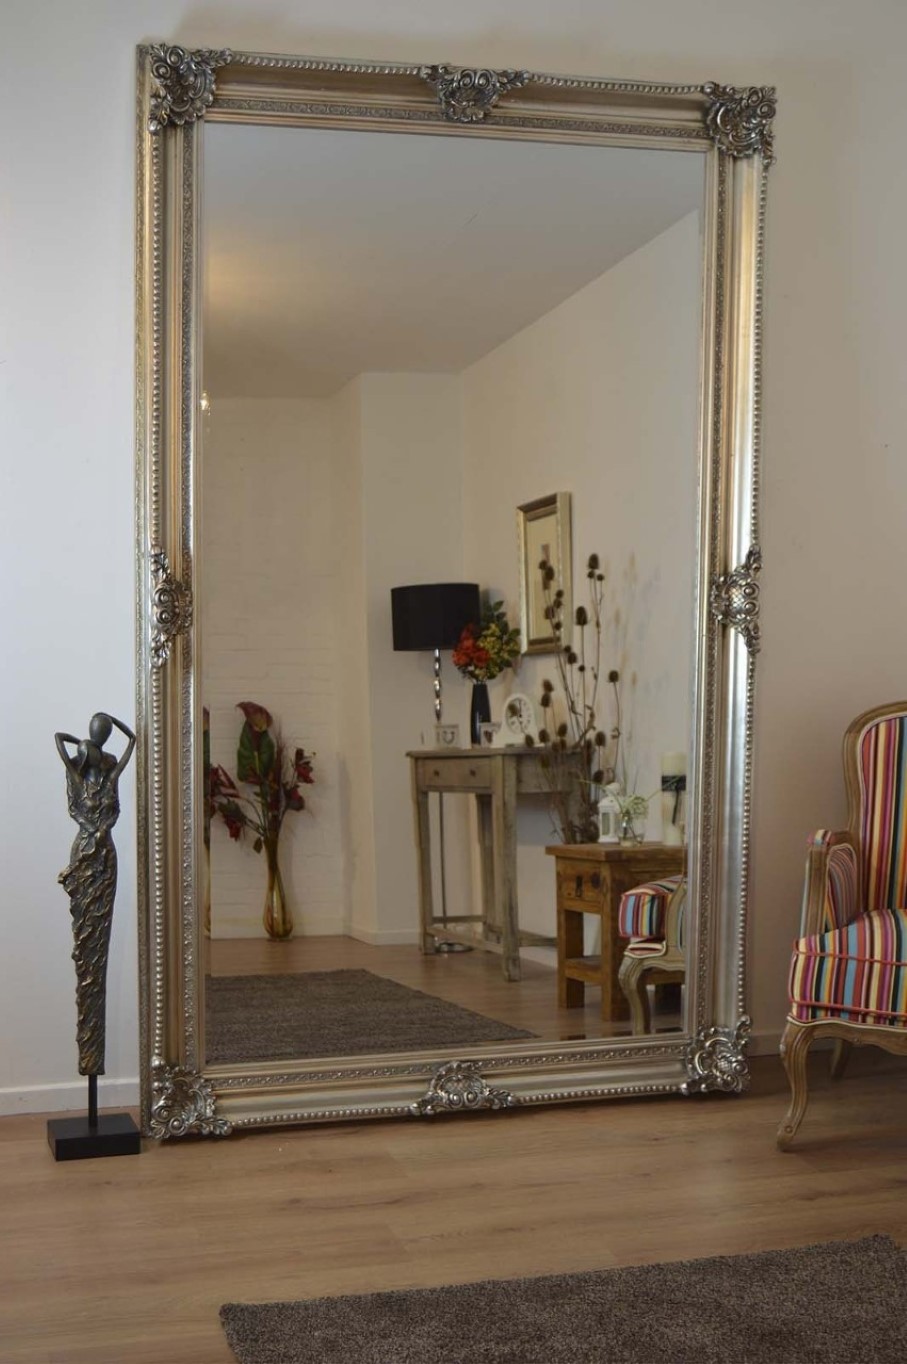 wonderful-large-wall-mirror-with-ornately-frame-design-idea-feat-antique-floor-display-and-stripes-accent-chair.jpg